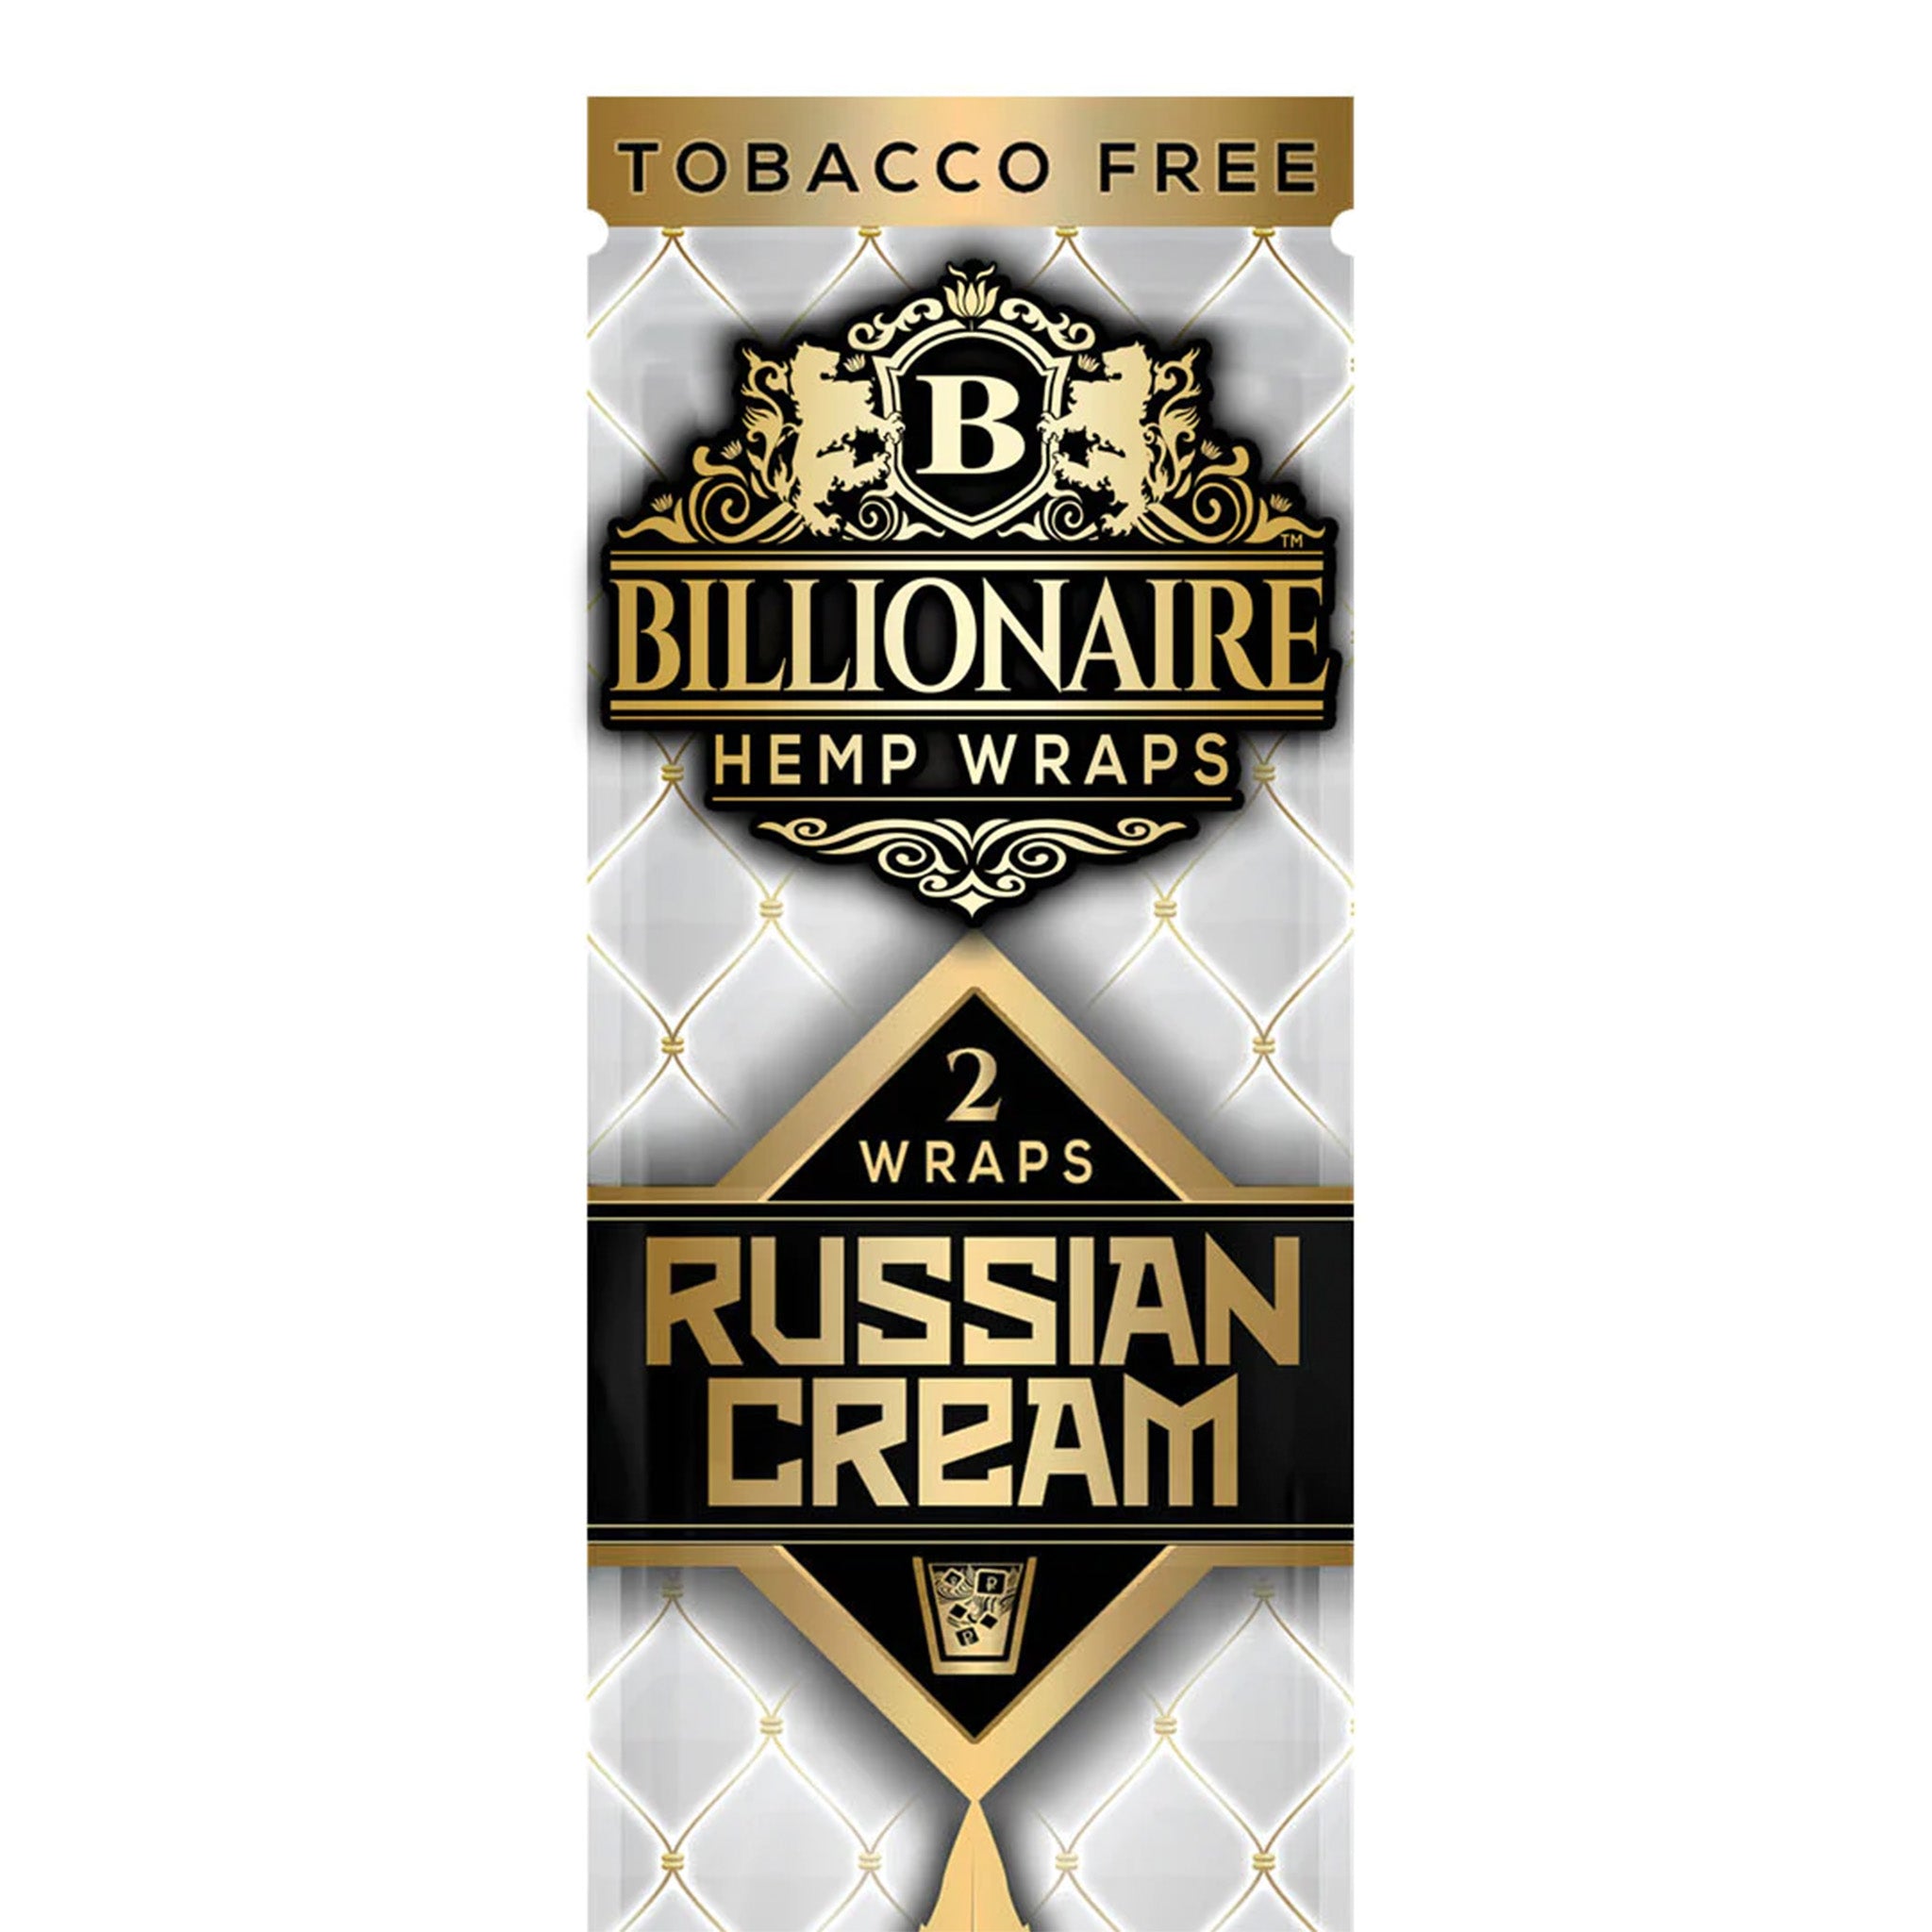 Billionaire Hemp Wraps - Two Packs Rolling Papers Ultimate Brands Russian Cream 